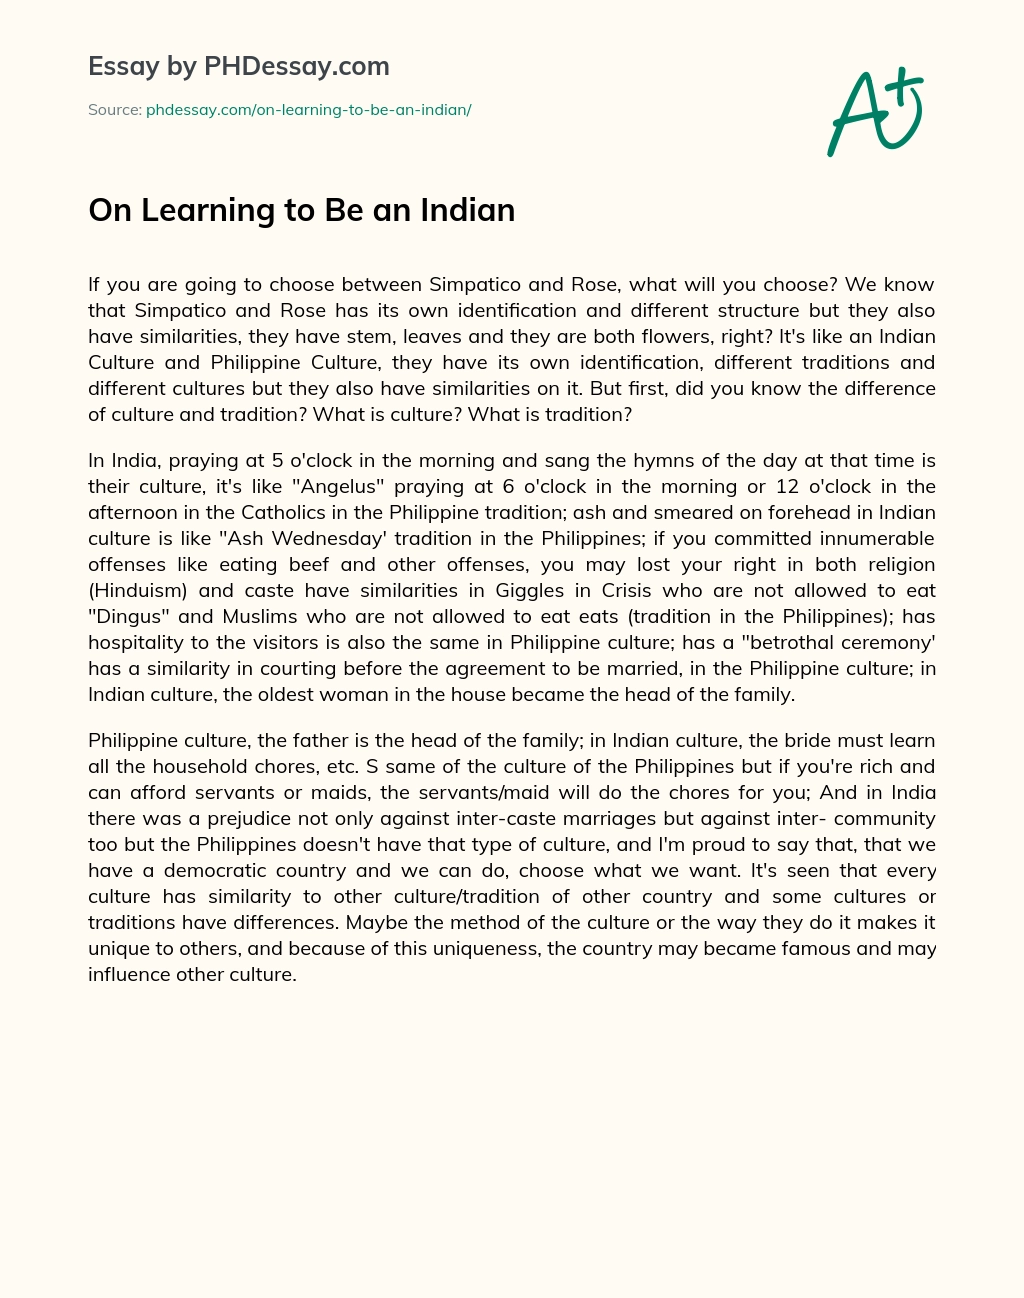 On Learning to Be an Indian essay